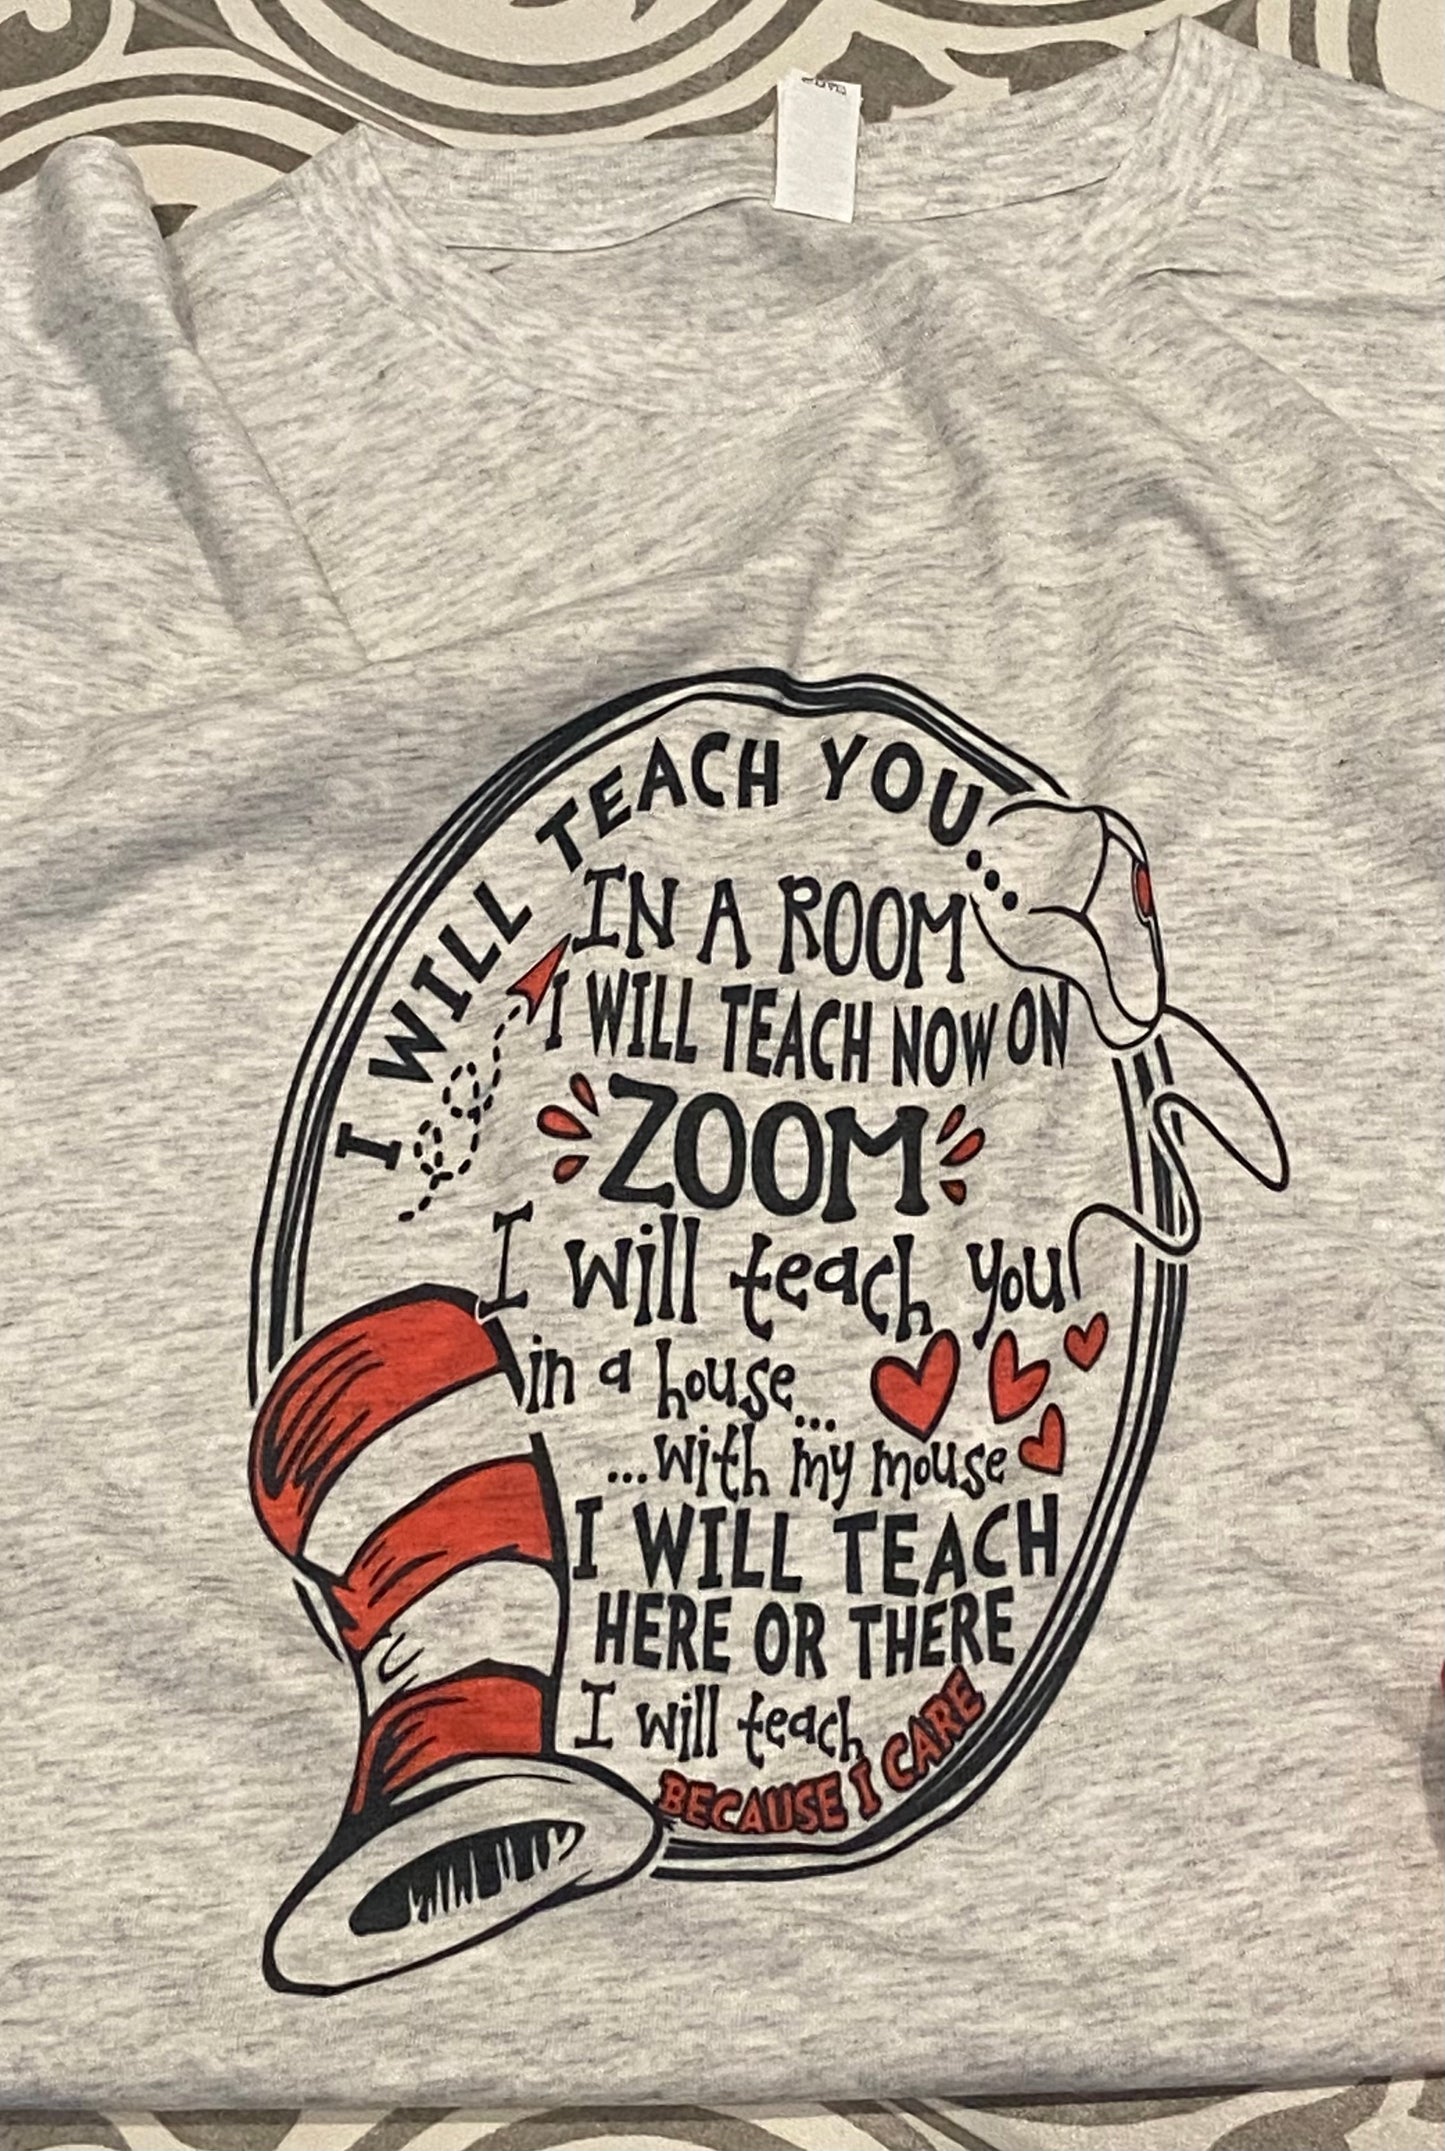 I will teach you now on Zoom- Dr. Seuss